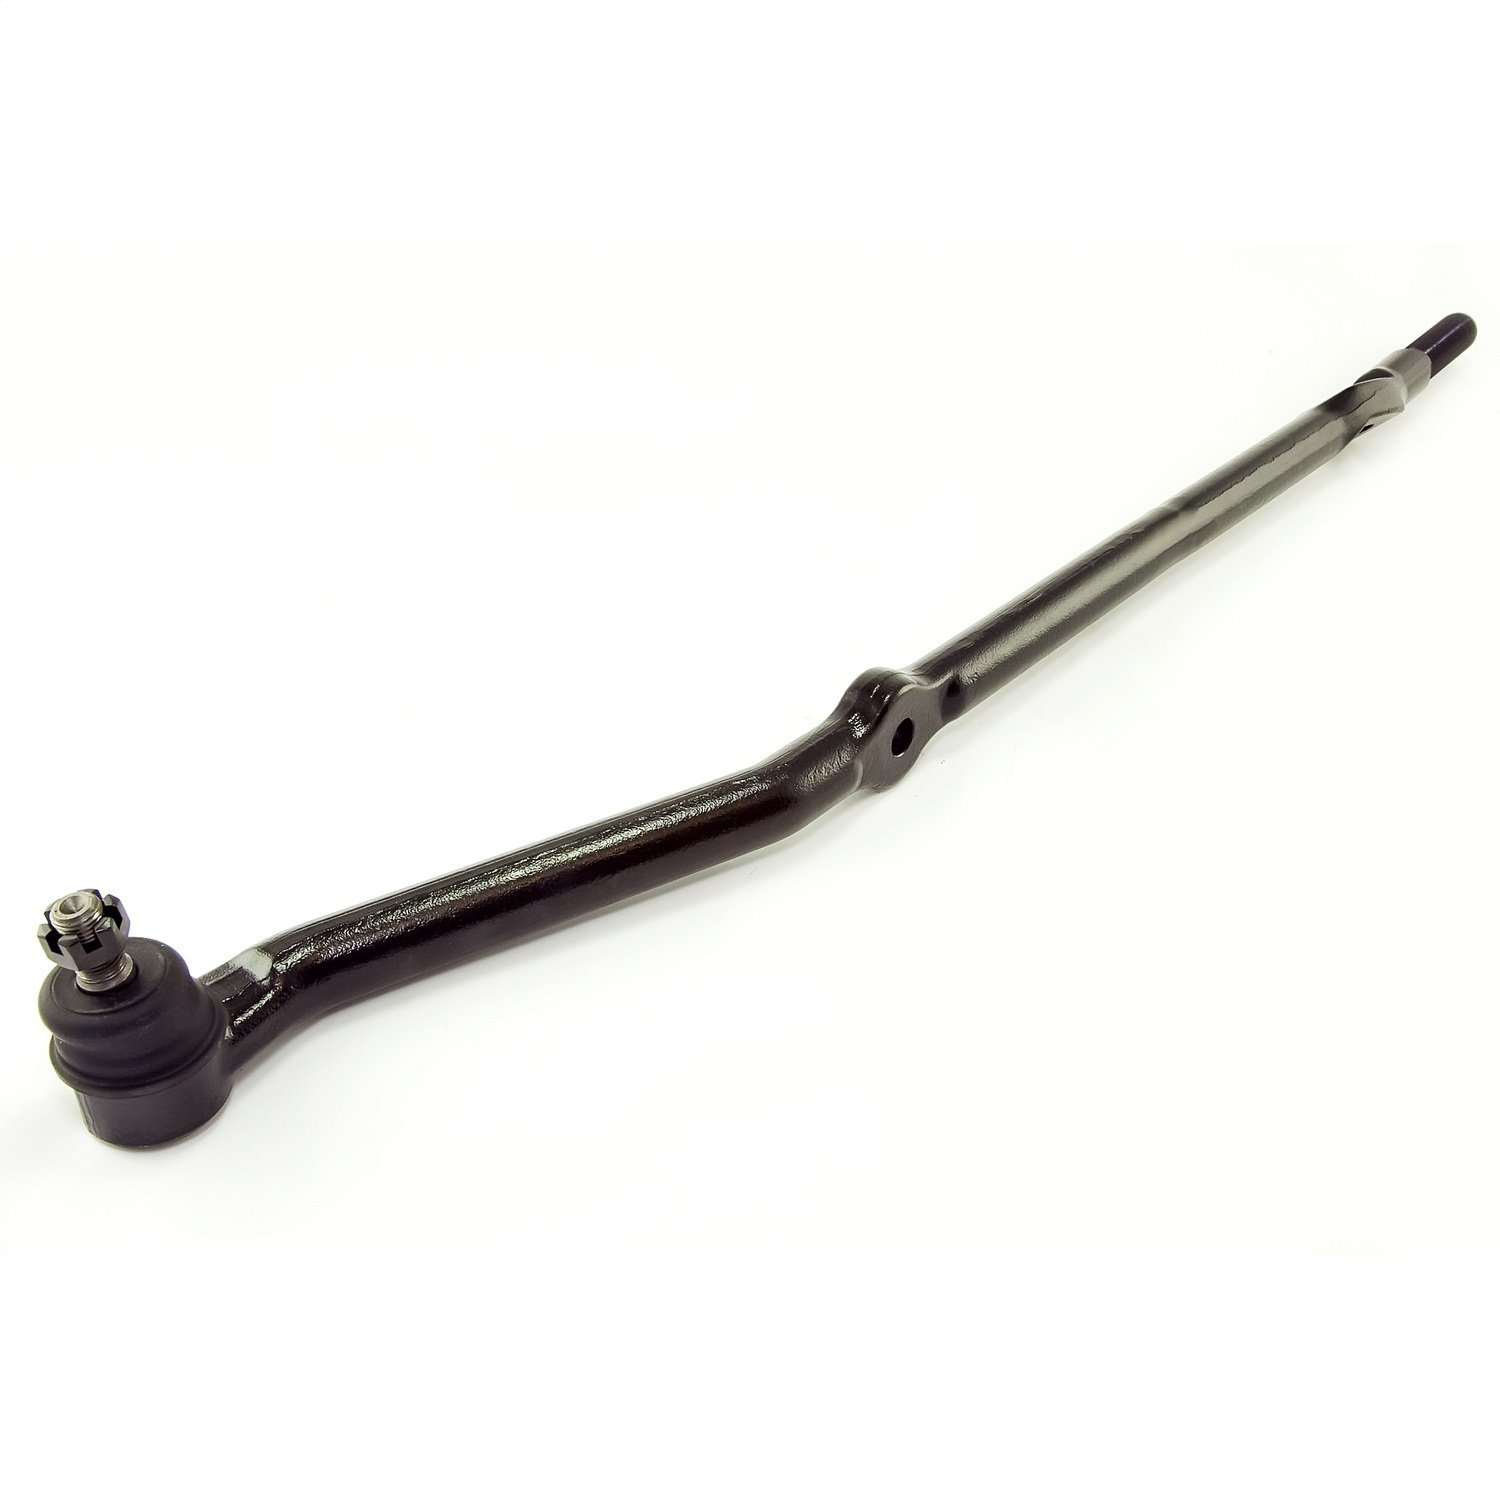 Stock replacement tie rod end from Omix-ADA, Fits 97-06 Jeep Wrangler TJ and 04-06 LJ Wrangler Unlimited. Left hand thread.